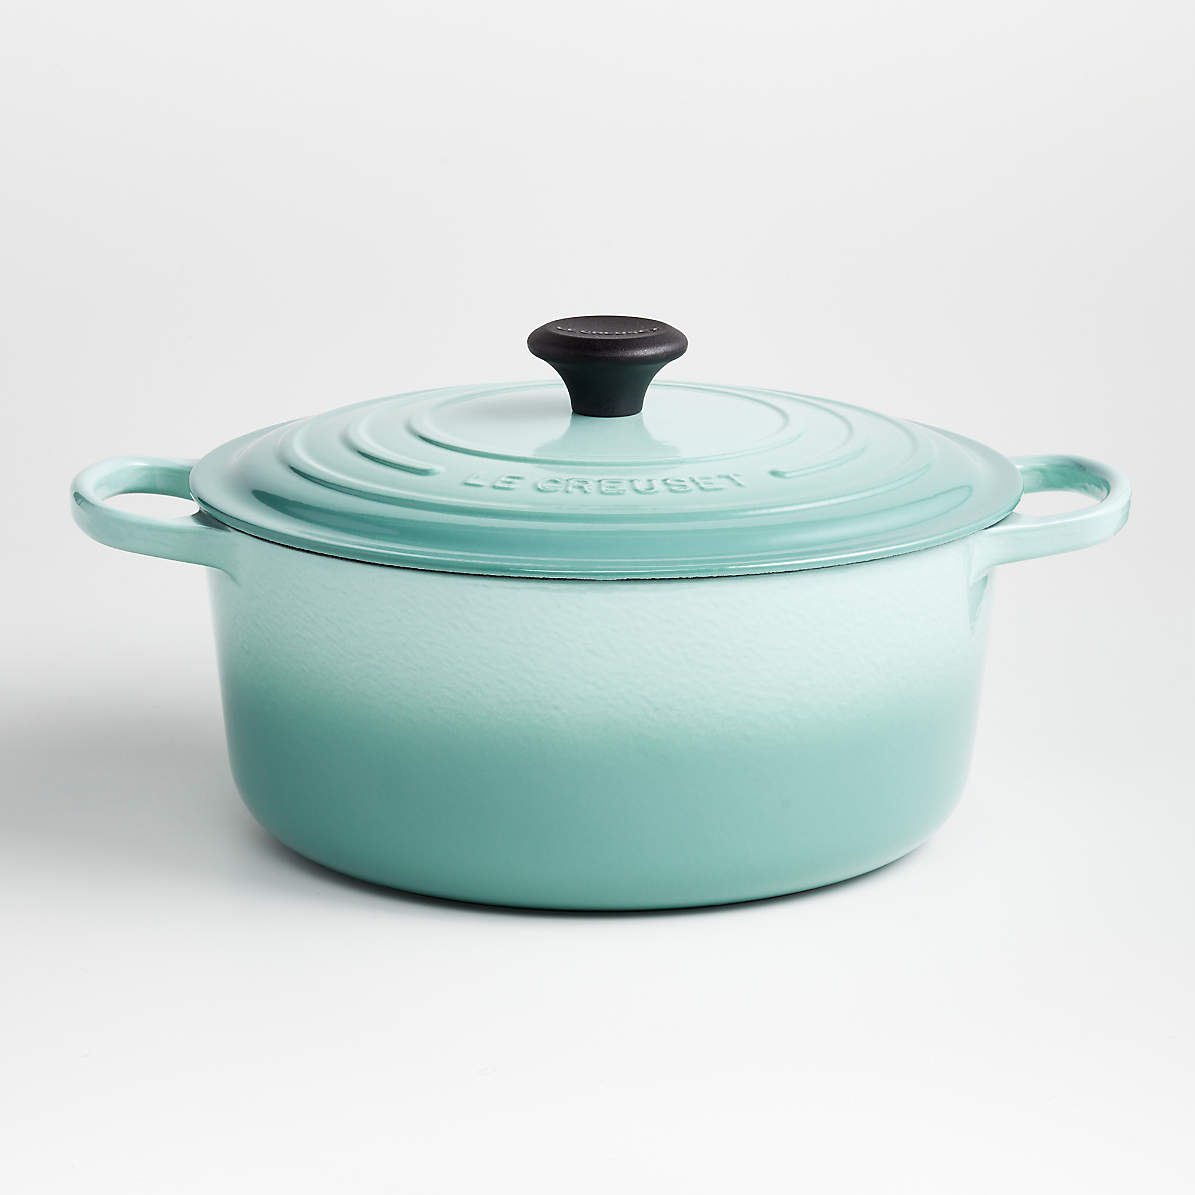 le creuset customer service canada - Cultivated Online Diary Efecto